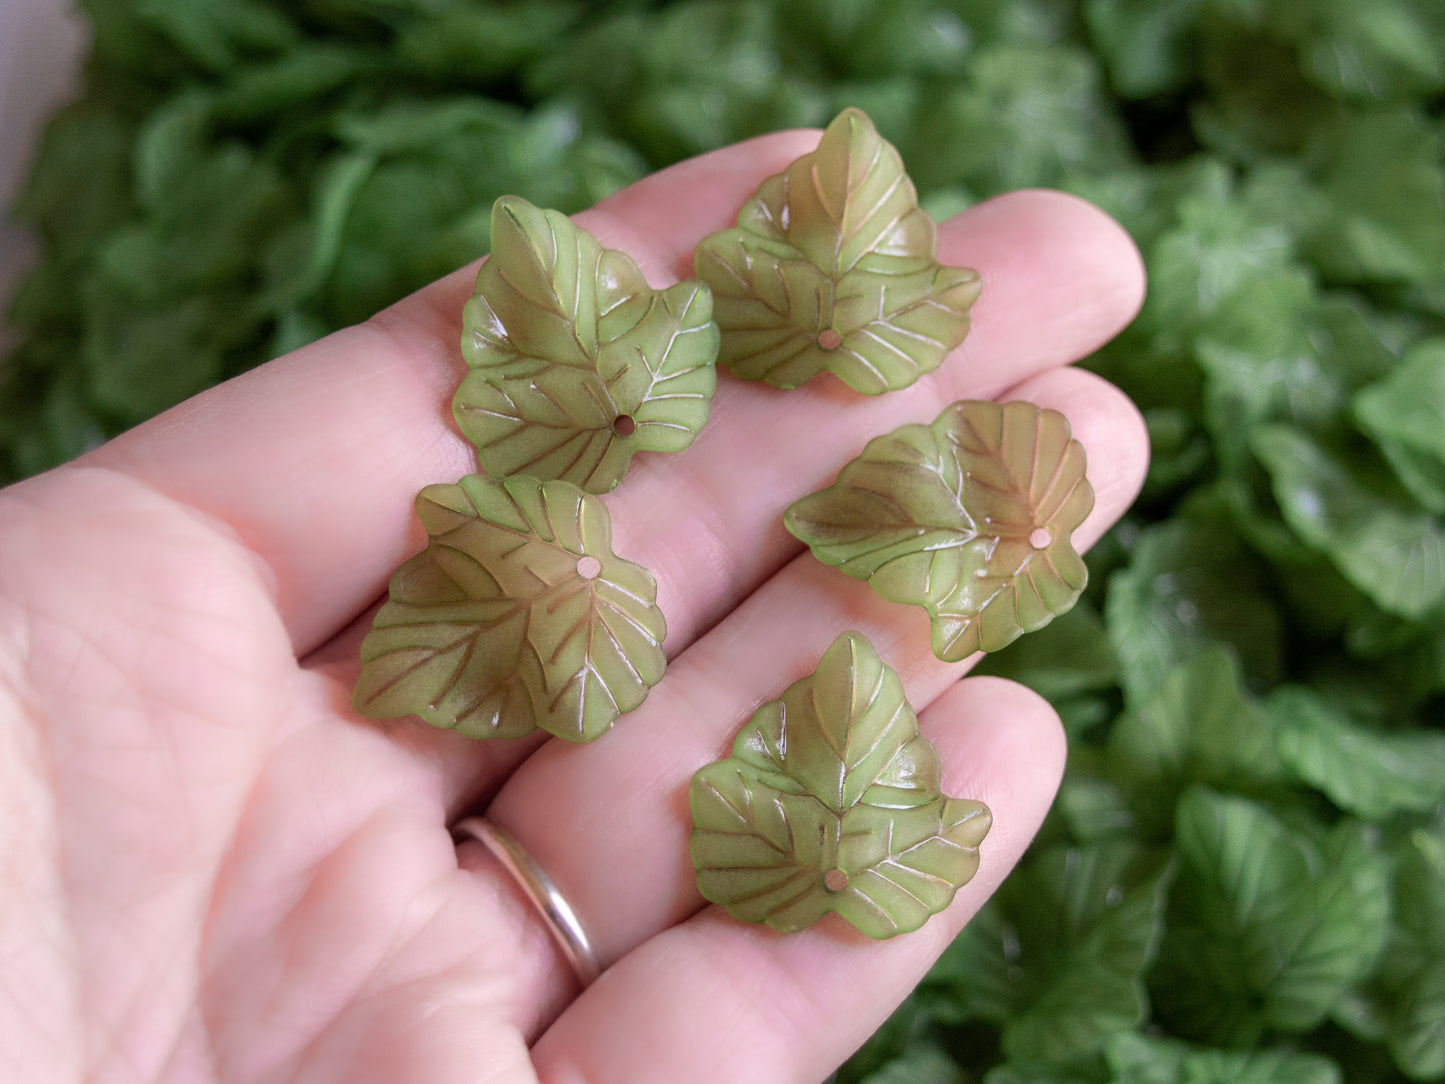 25mm Frosted Acrylic Leaf Beads in Green